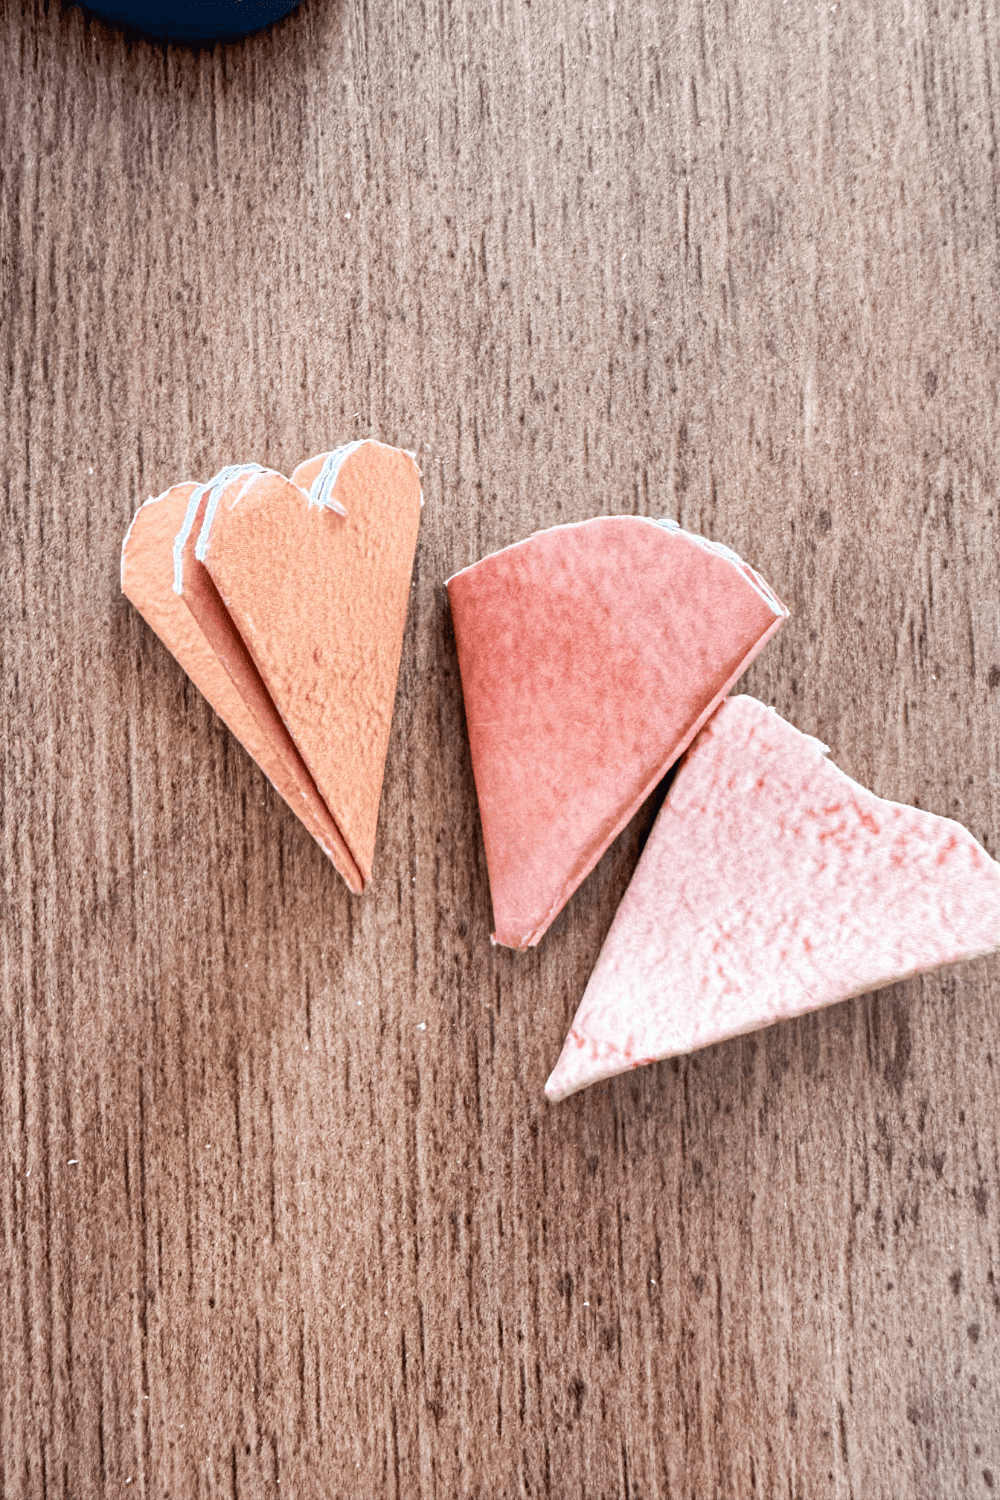 folded up paper. Left to right, orange with a heart cut, red with an arch cut, pink with a wave cut